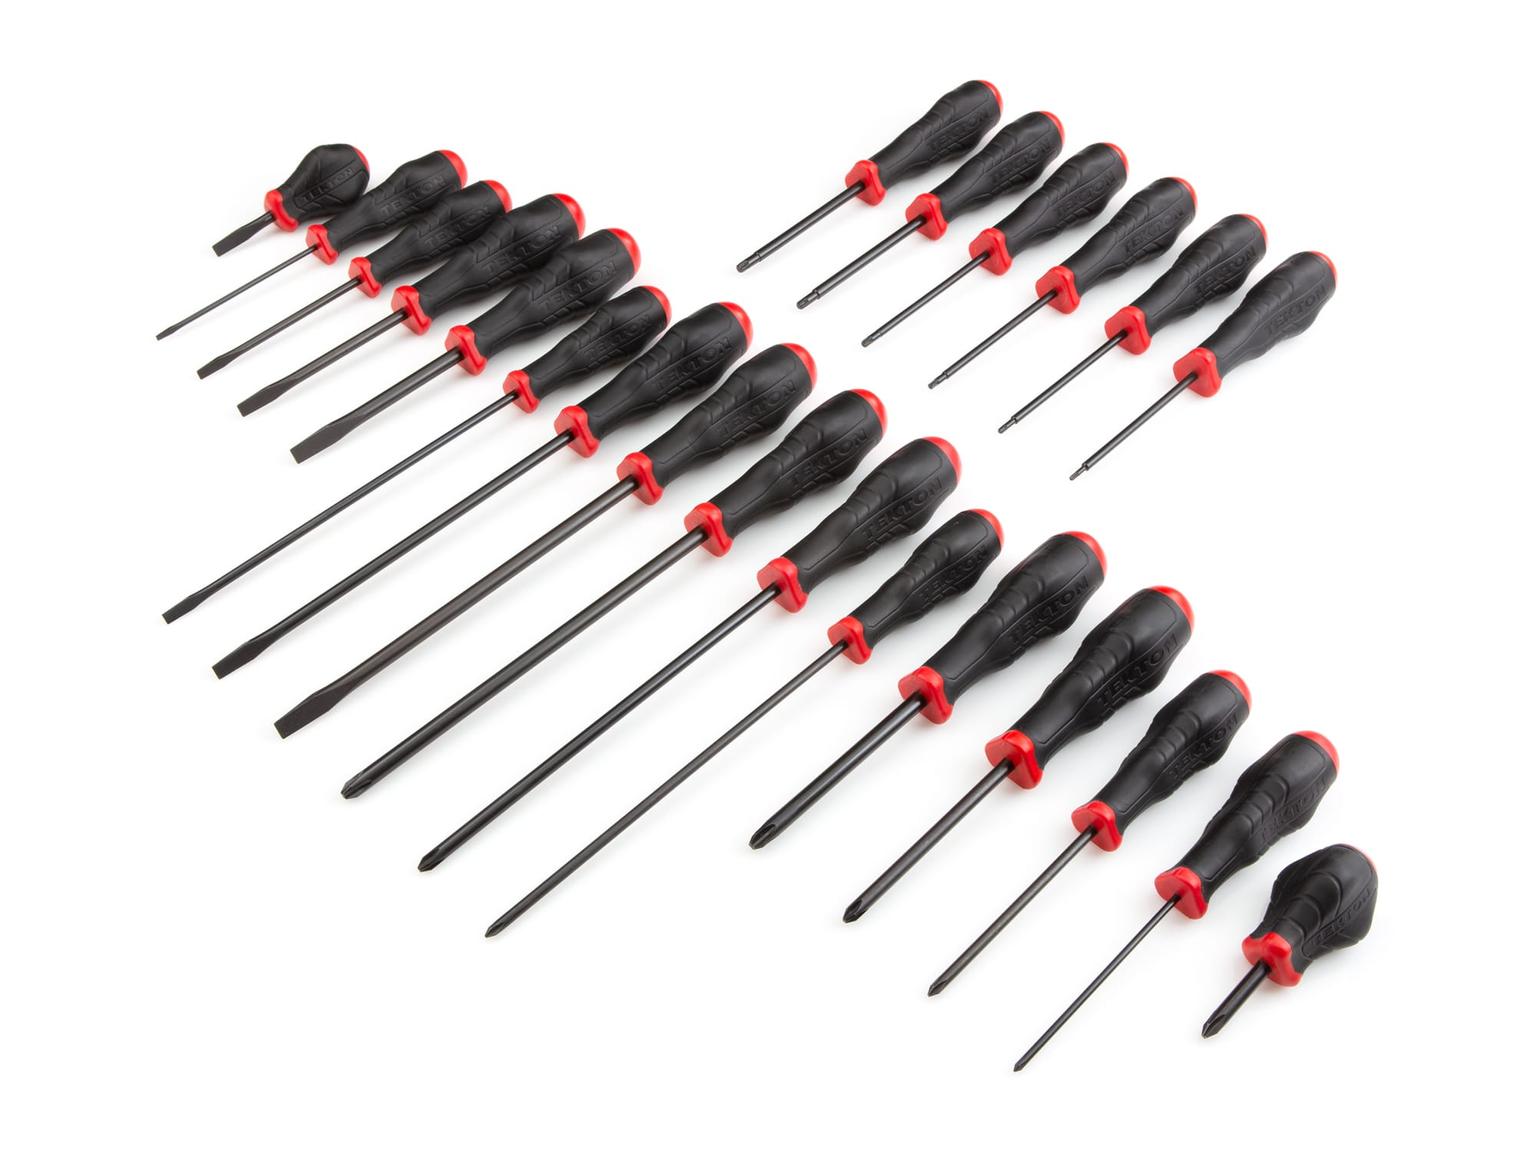 TEKTON DRV41502-T High-Torque Black Oxide Blade Screwdriver Set, 22-Piece (#0-#3, 1/8-5/16 in., T10-30) with Red Rails